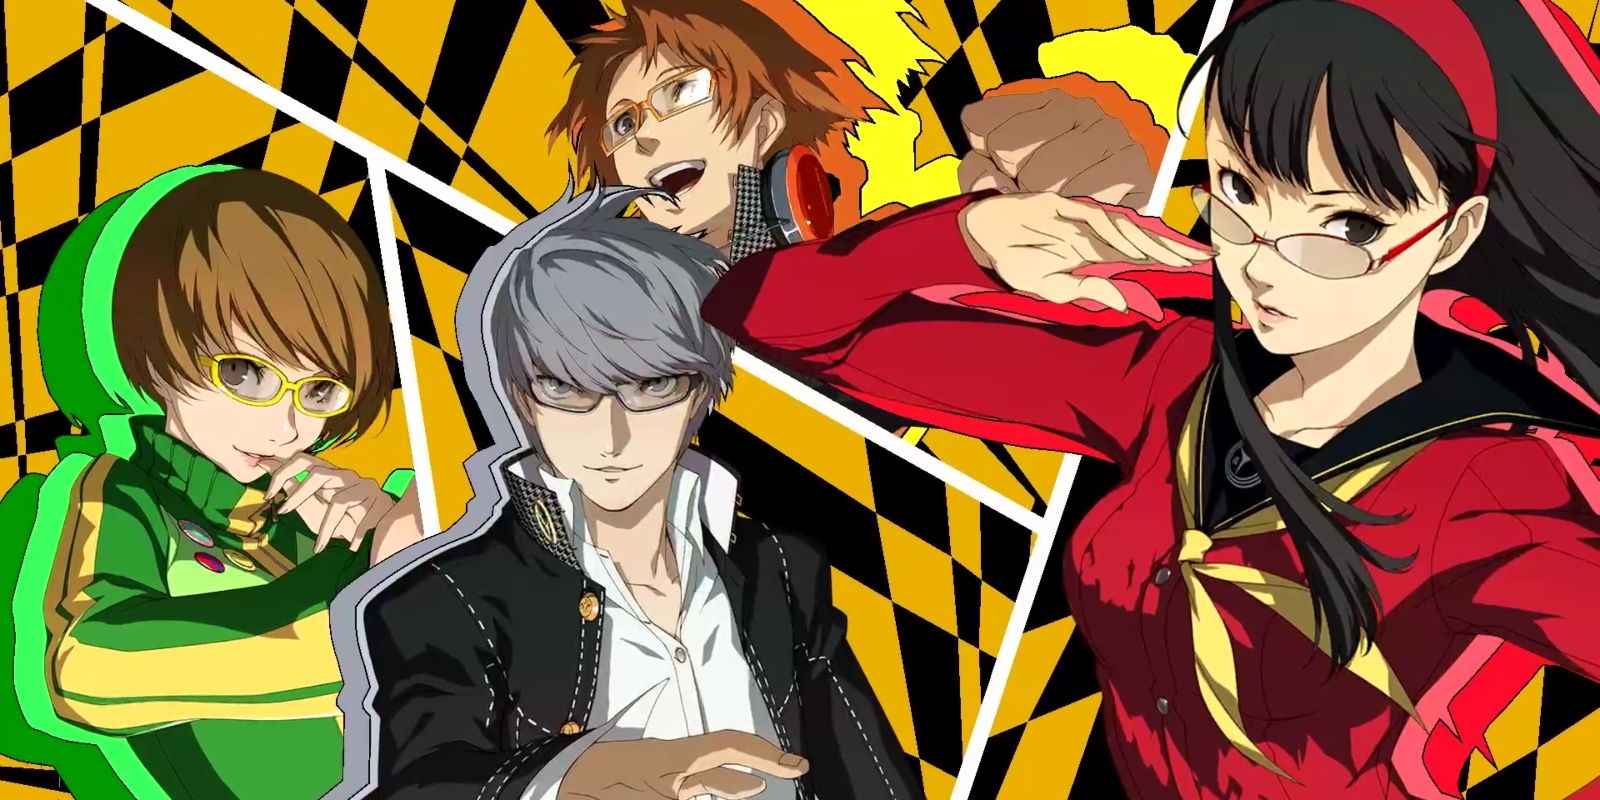 an all-out attack screen from Persona 4 Golden featuring the protagonist, Yosuke, Chie, and Yukiko